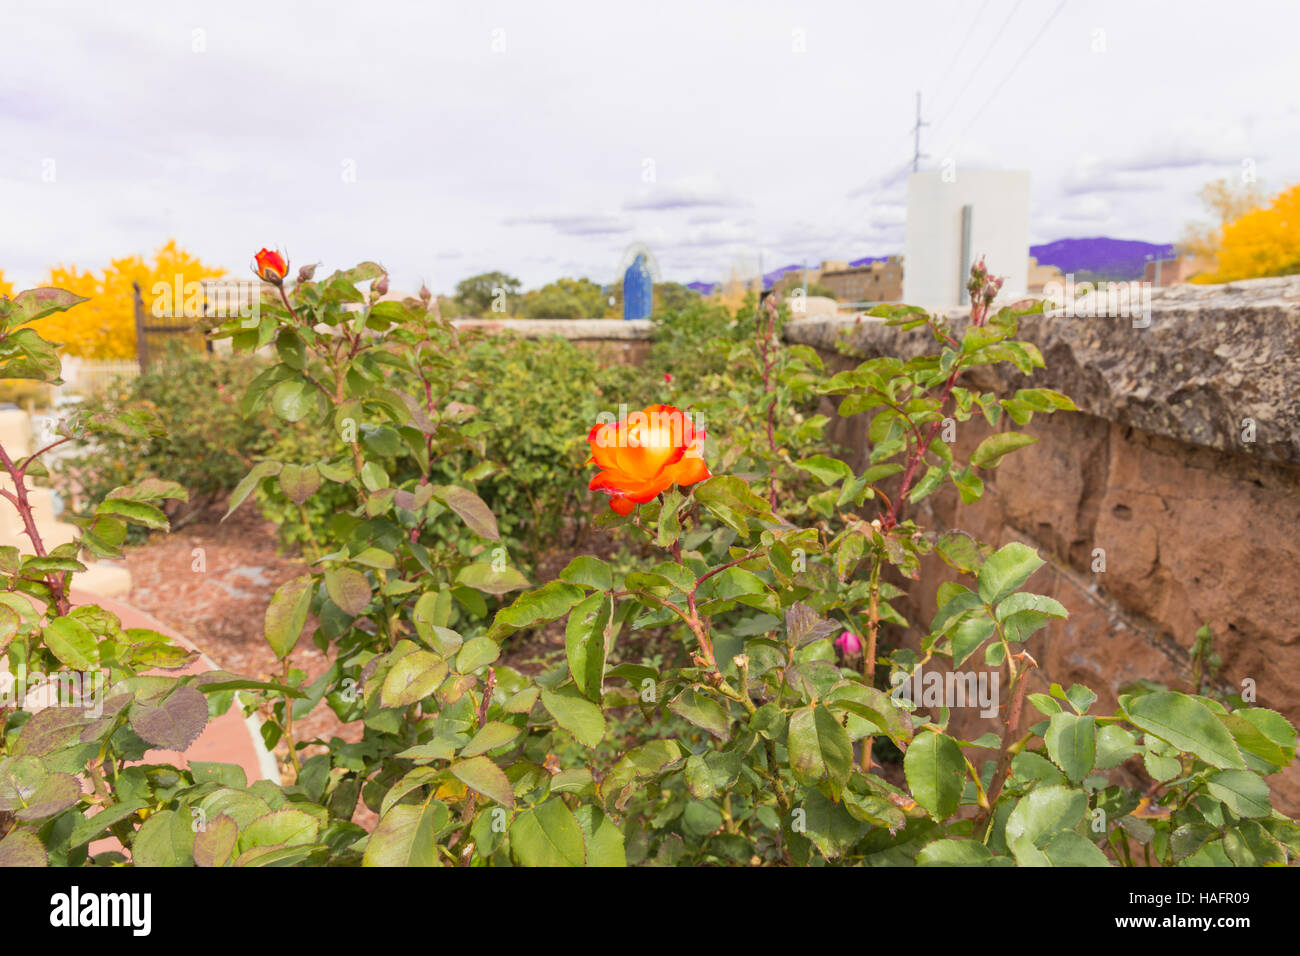 Our Lady Guadalupe Rose Garden Santa Fe, NM Stock Photo